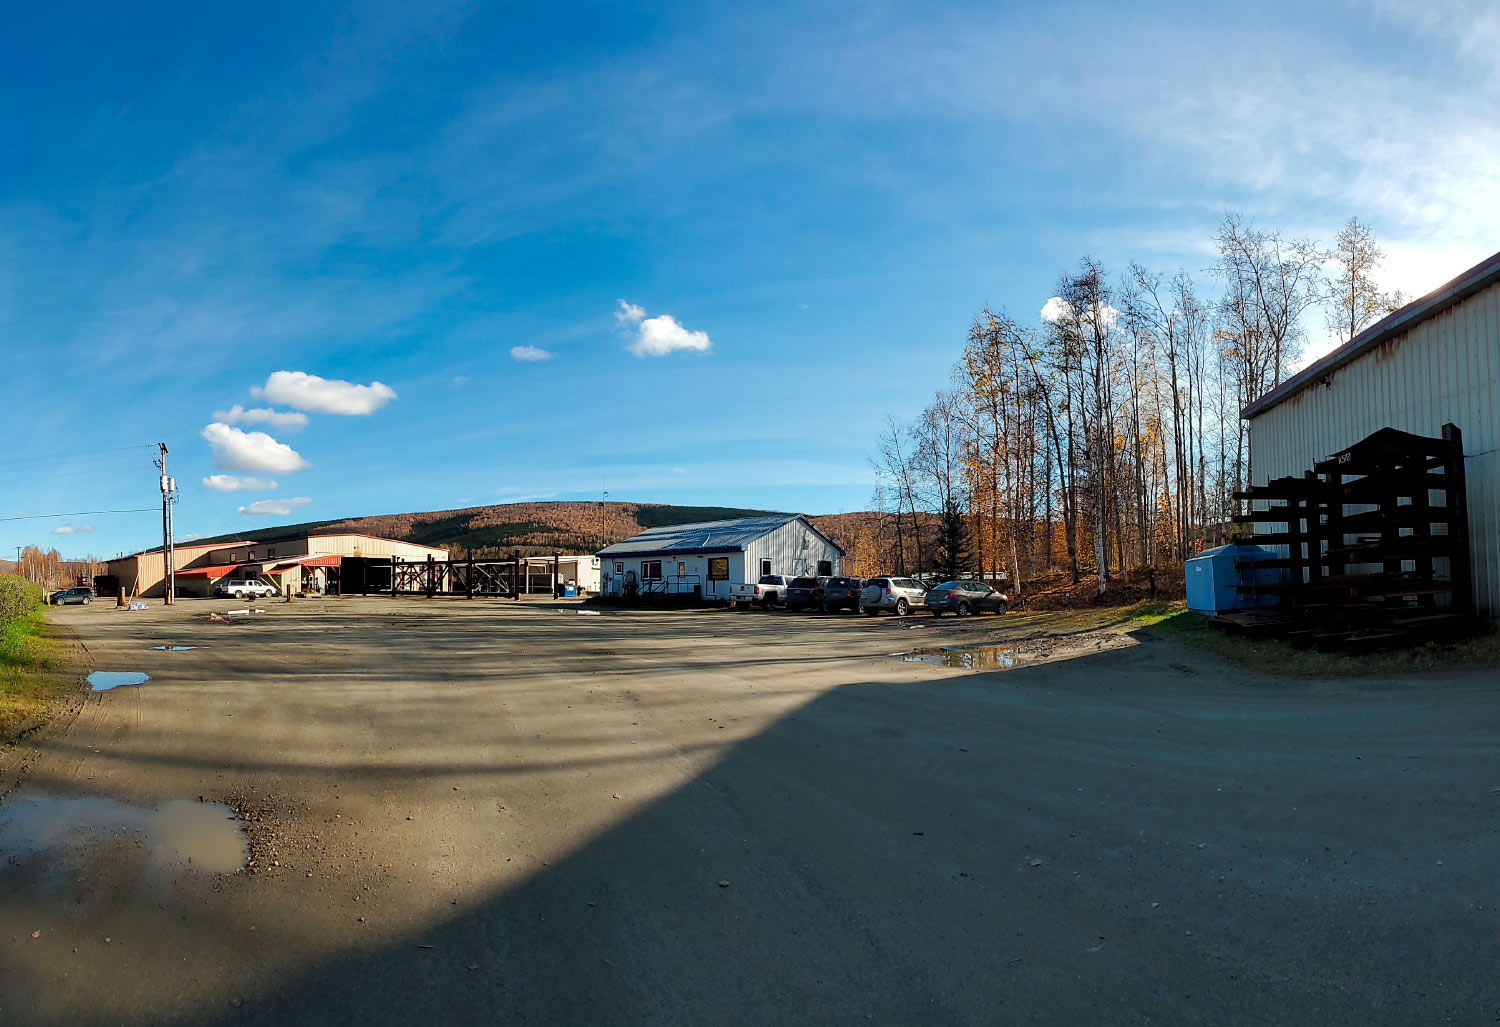 The Welding Shop operates out of Fox, north of Fairbanks. Its proximity to the North Slope makes it the ideal welder for Alaska’s oil industry in that area.